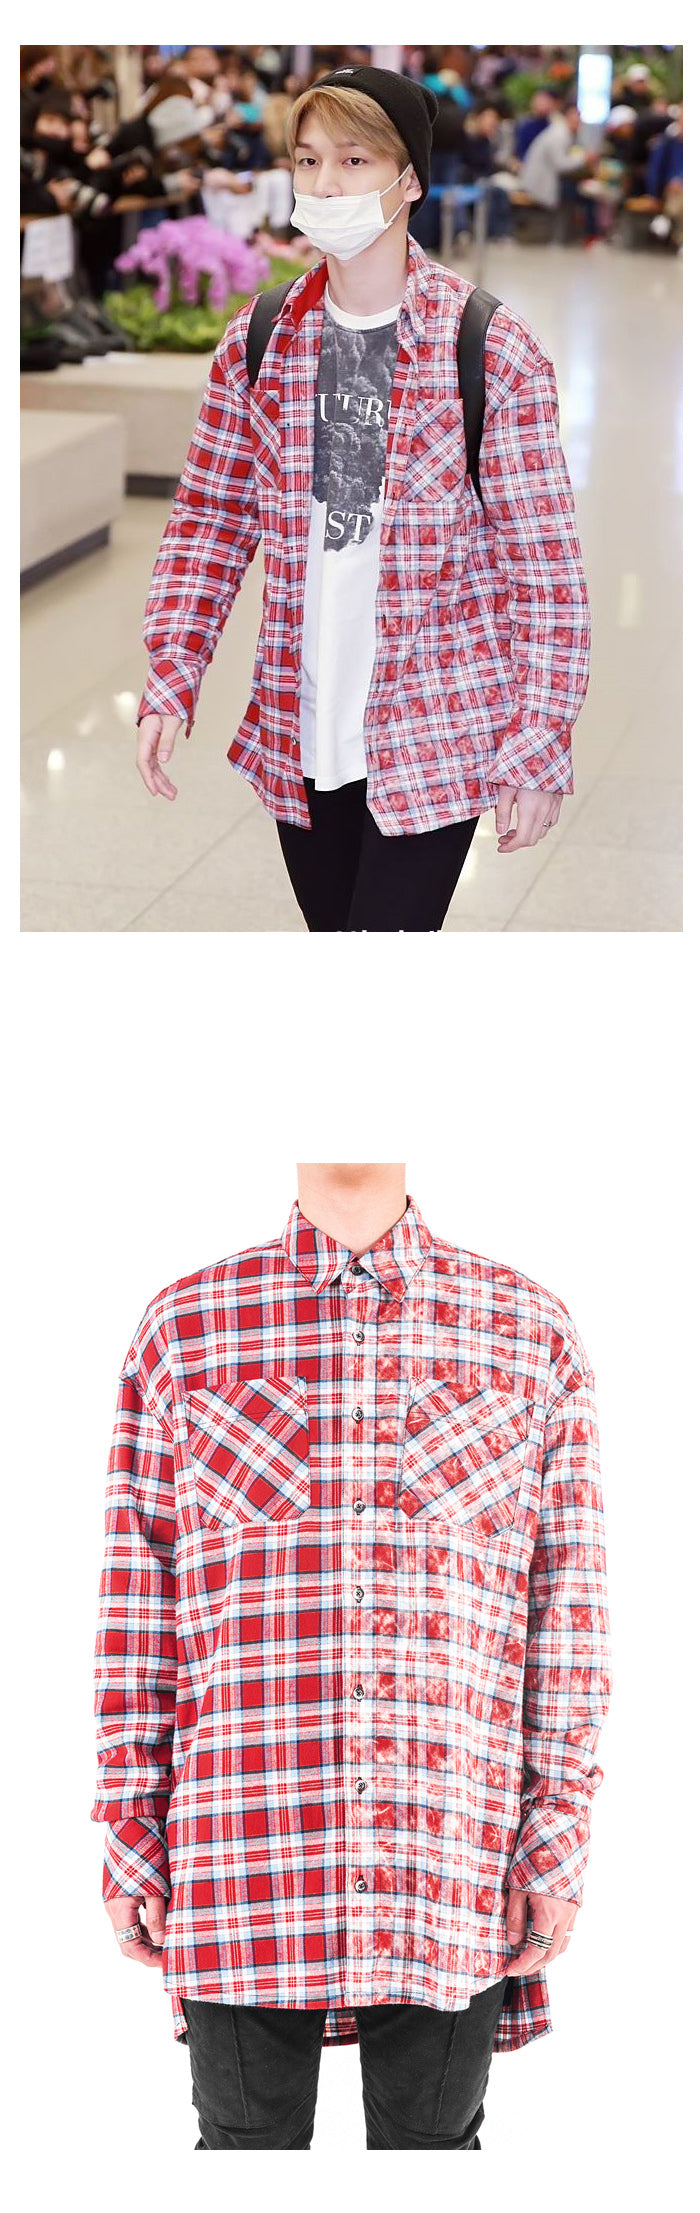 HALF FADED FLANNEL SHIRT - RED